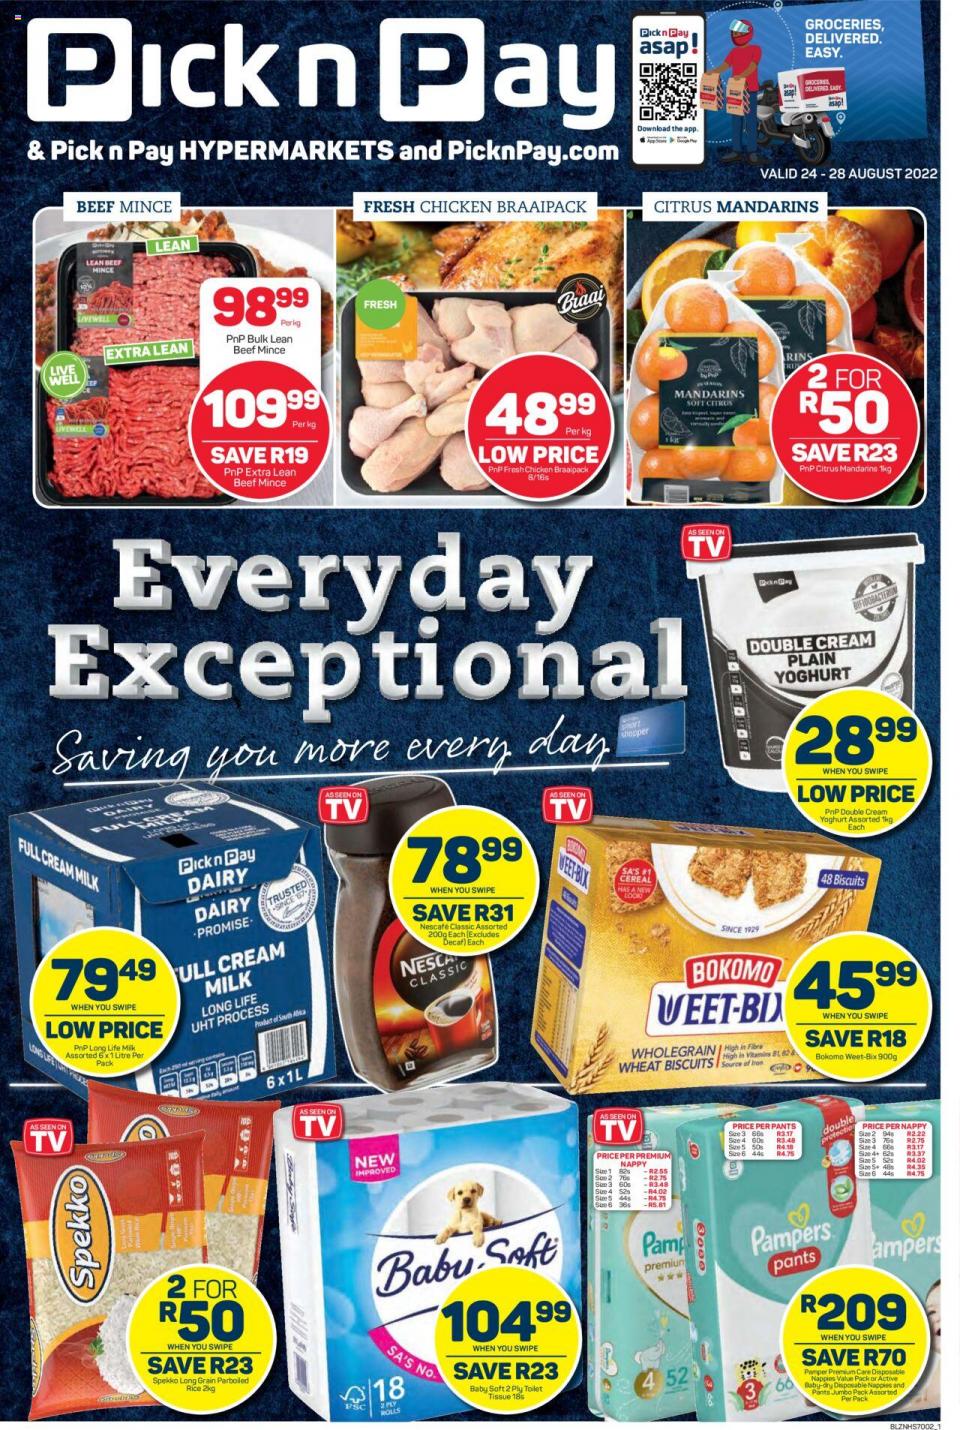 Pick n Pay Specials 24 – 28 August 2022